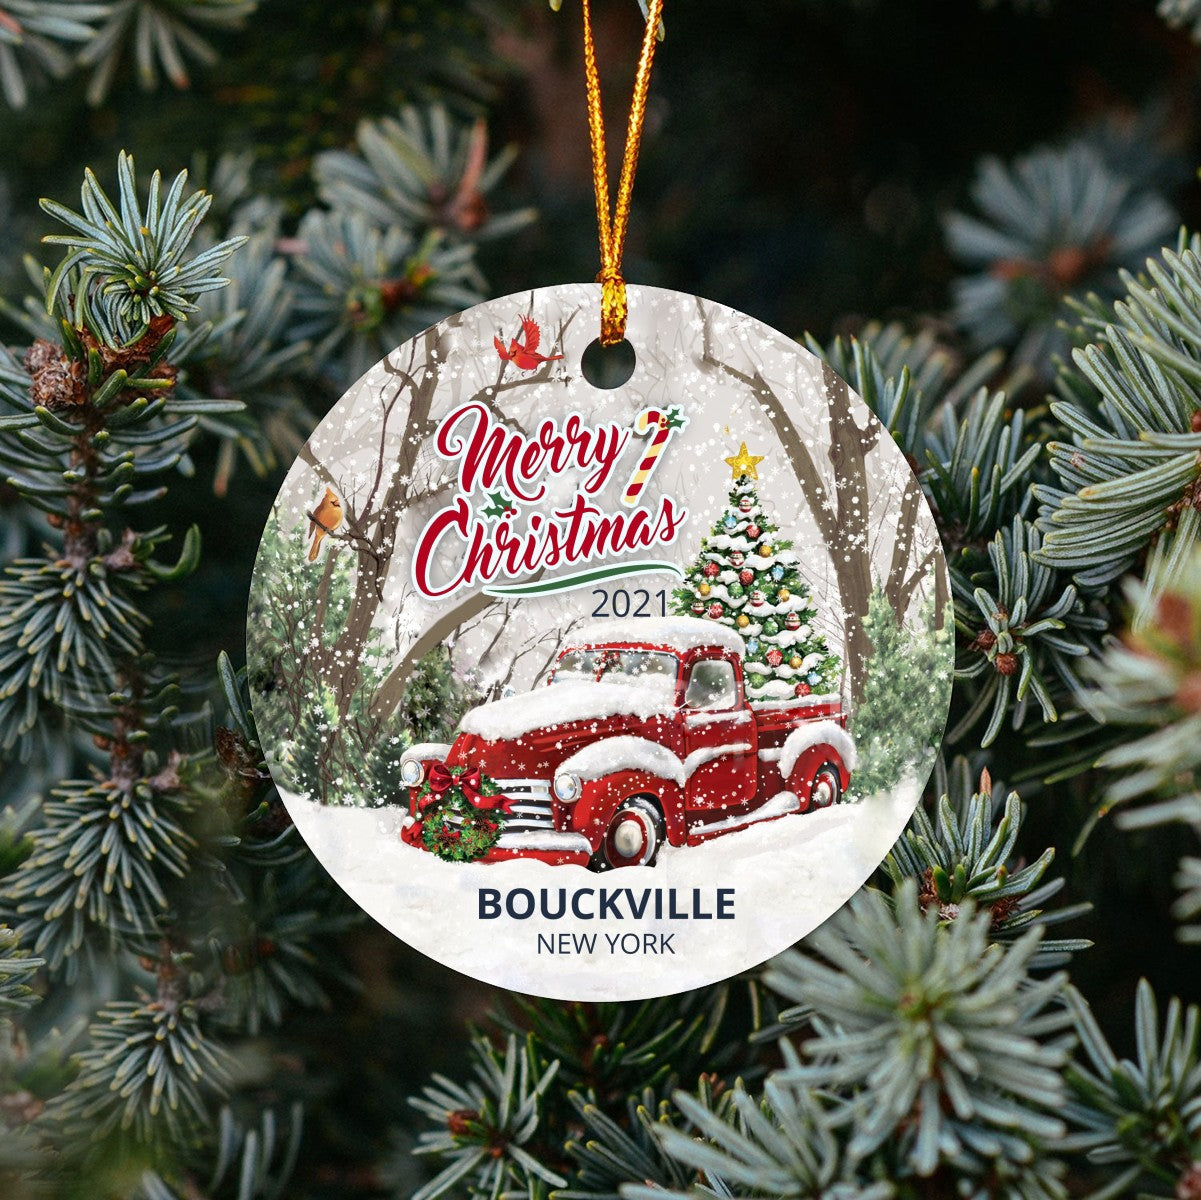 Christmas Tree Ornaments Bouckville - Ornament With Name City, State Bouckville New York NY Ornament - Red Truck Xmas Ornaments 3'' Plastic Gift For Family, Friend And Housewarming